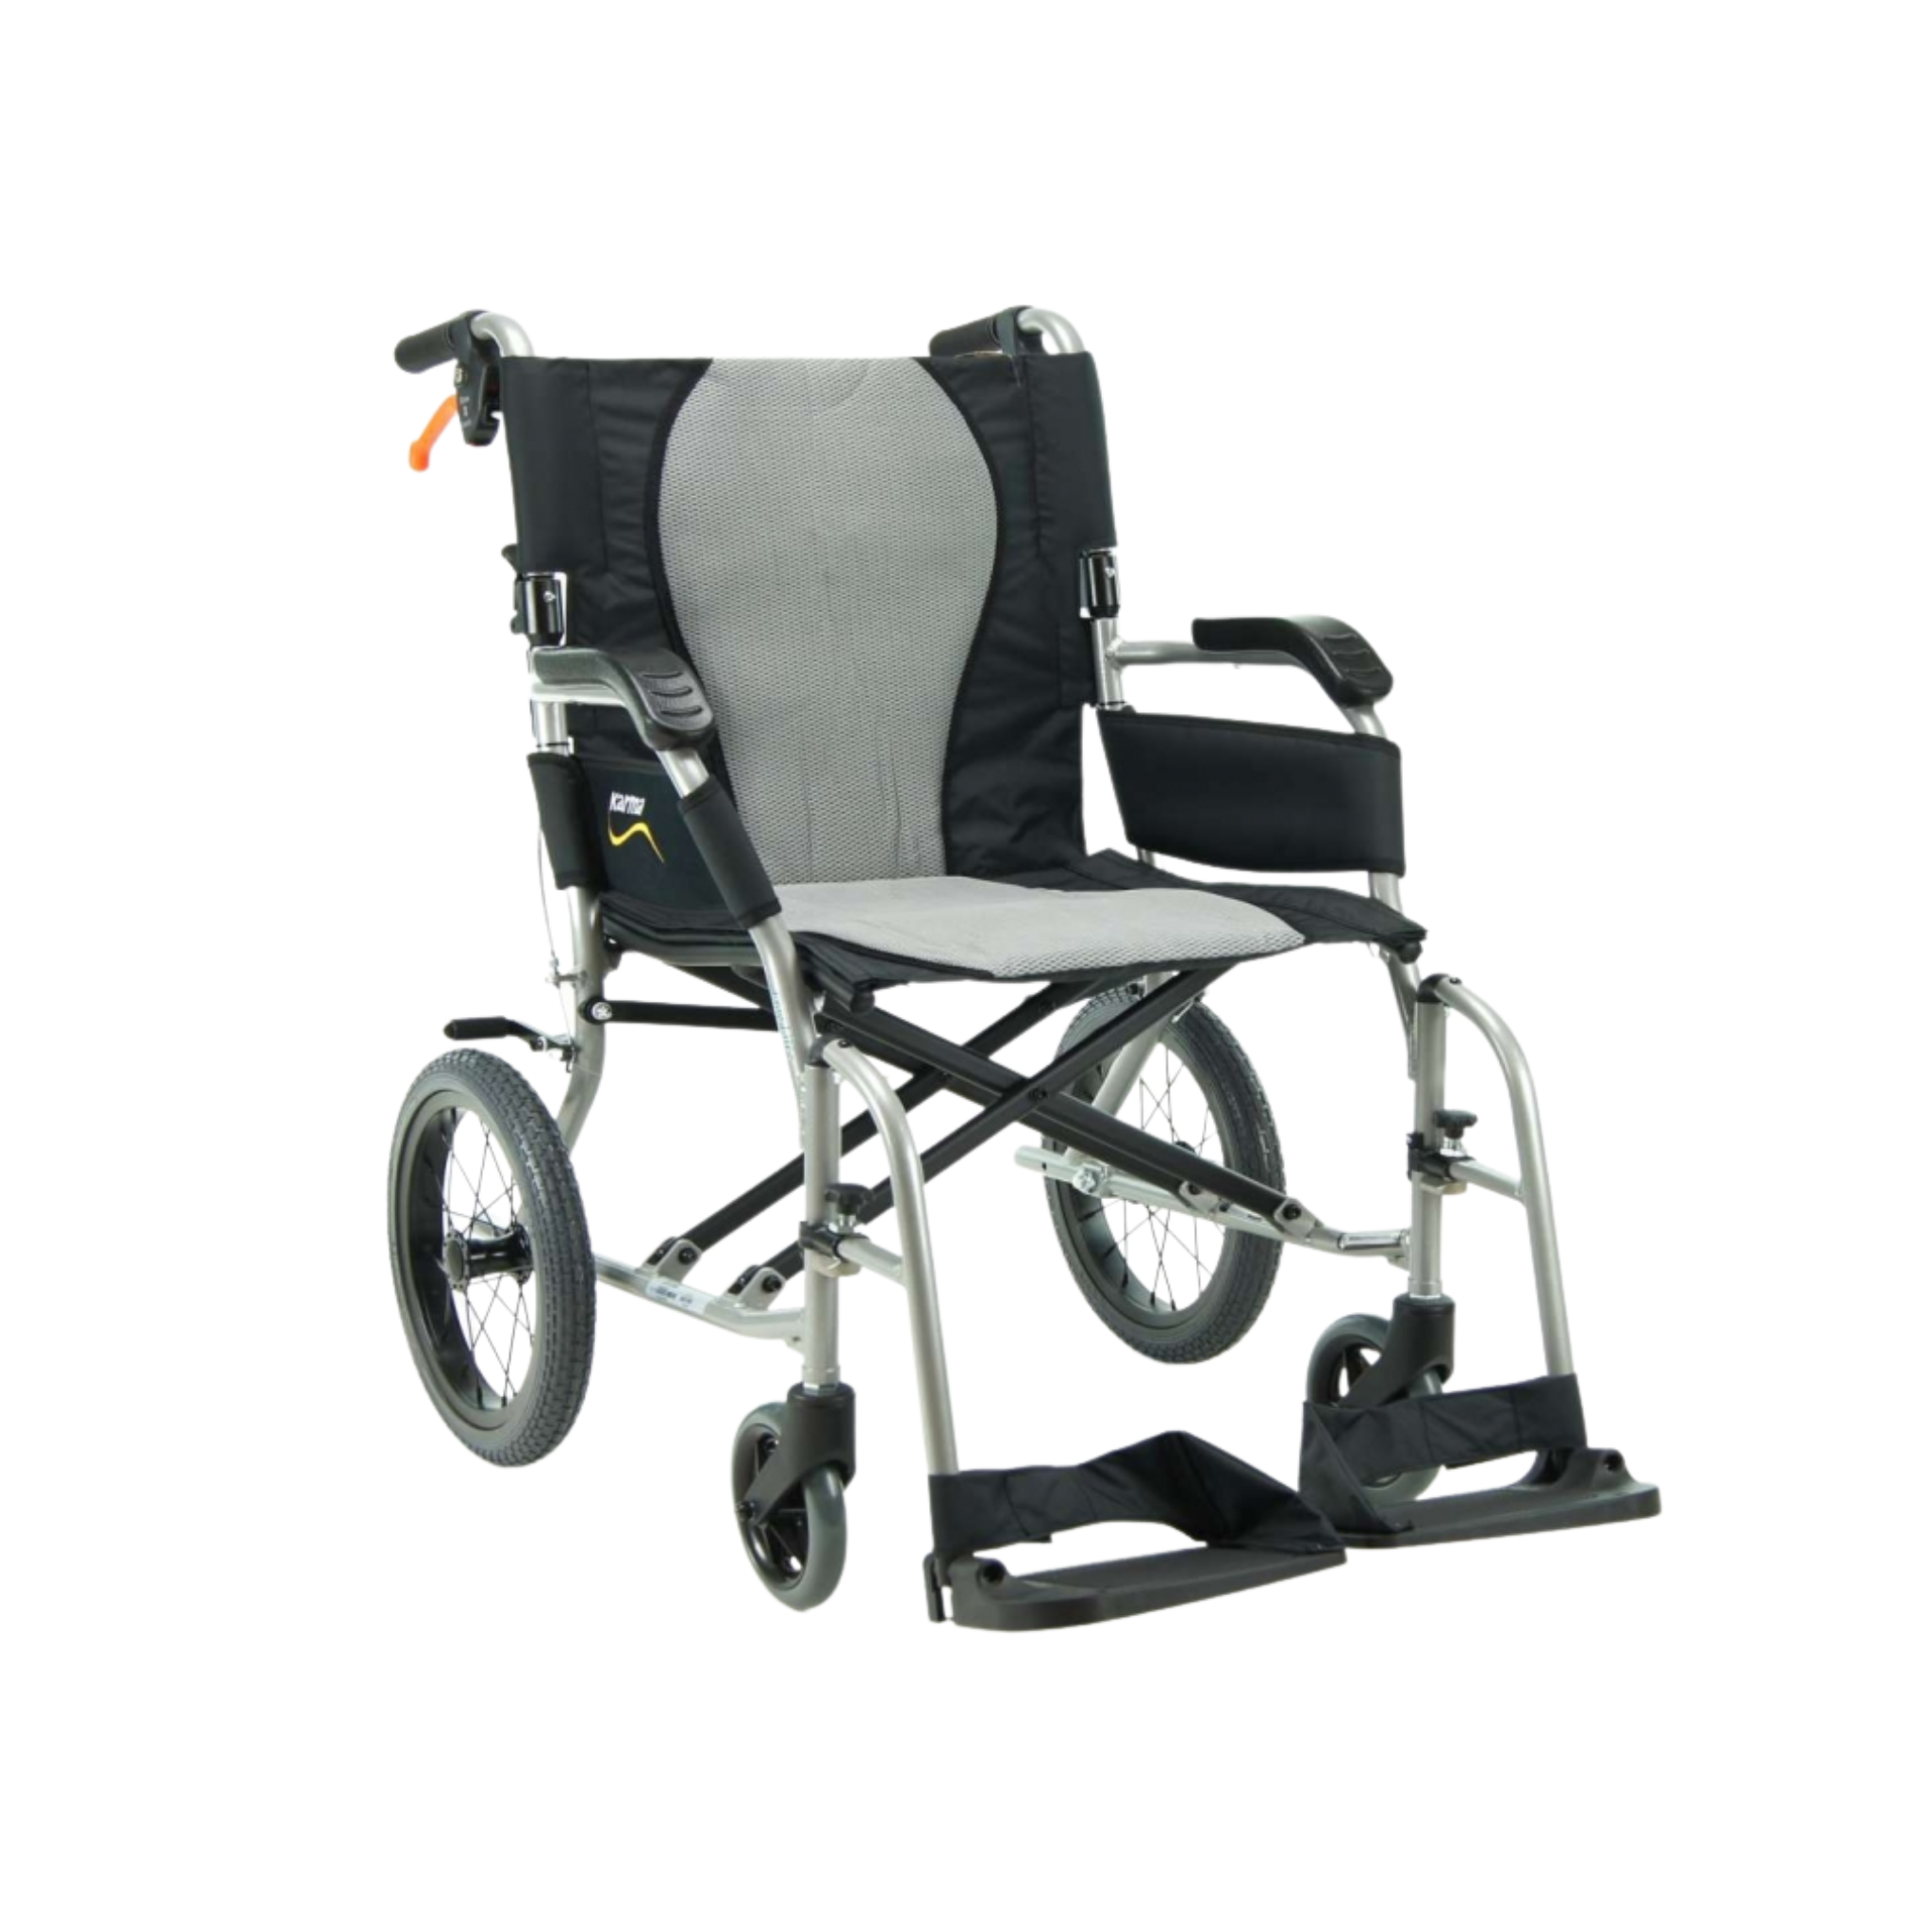 Rental - Karma Transit 16" Wheelchair from Aged Care & Medical